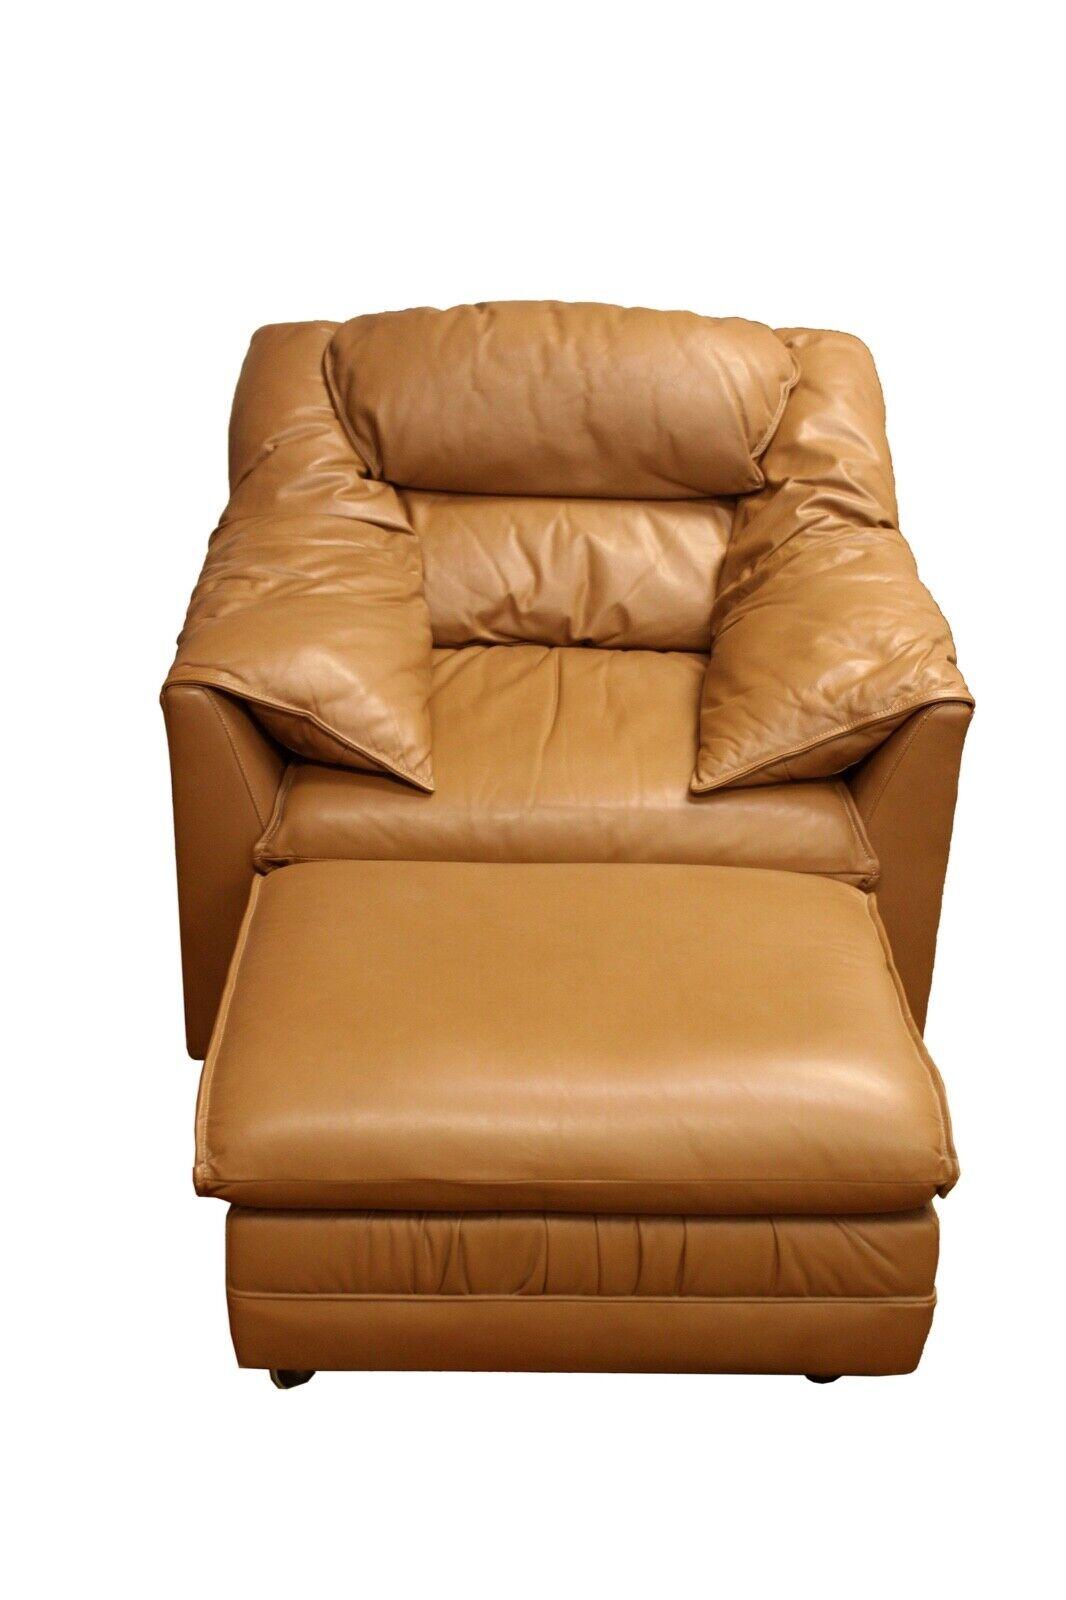 For your consideration is this comfy classic Emerson's Leather lounge chair and ottoman. Dimensions: Chair: 38